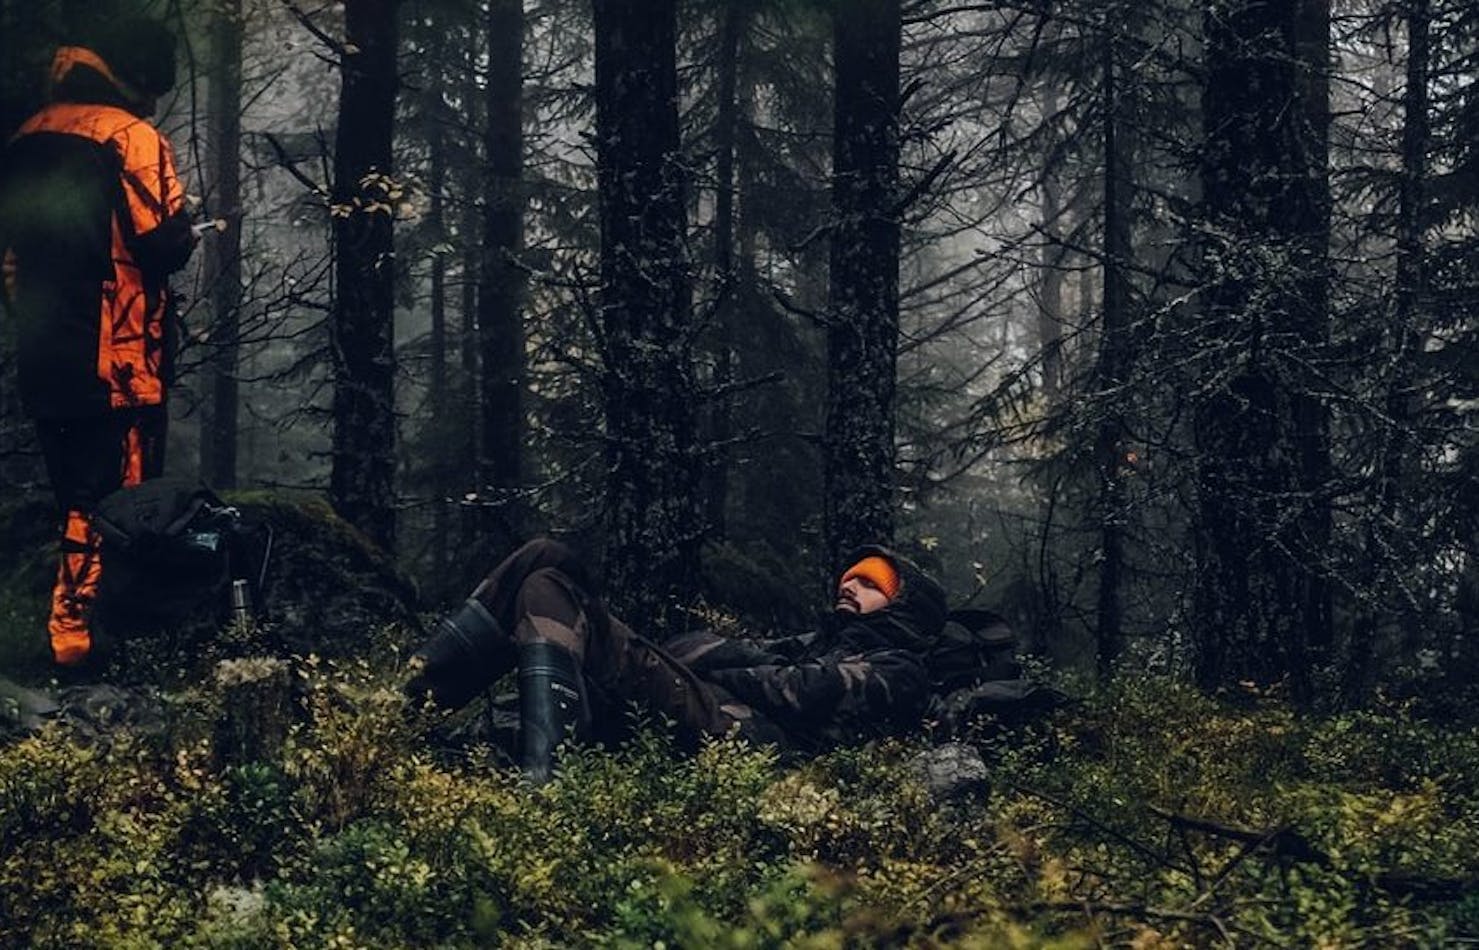 Hunters at rest